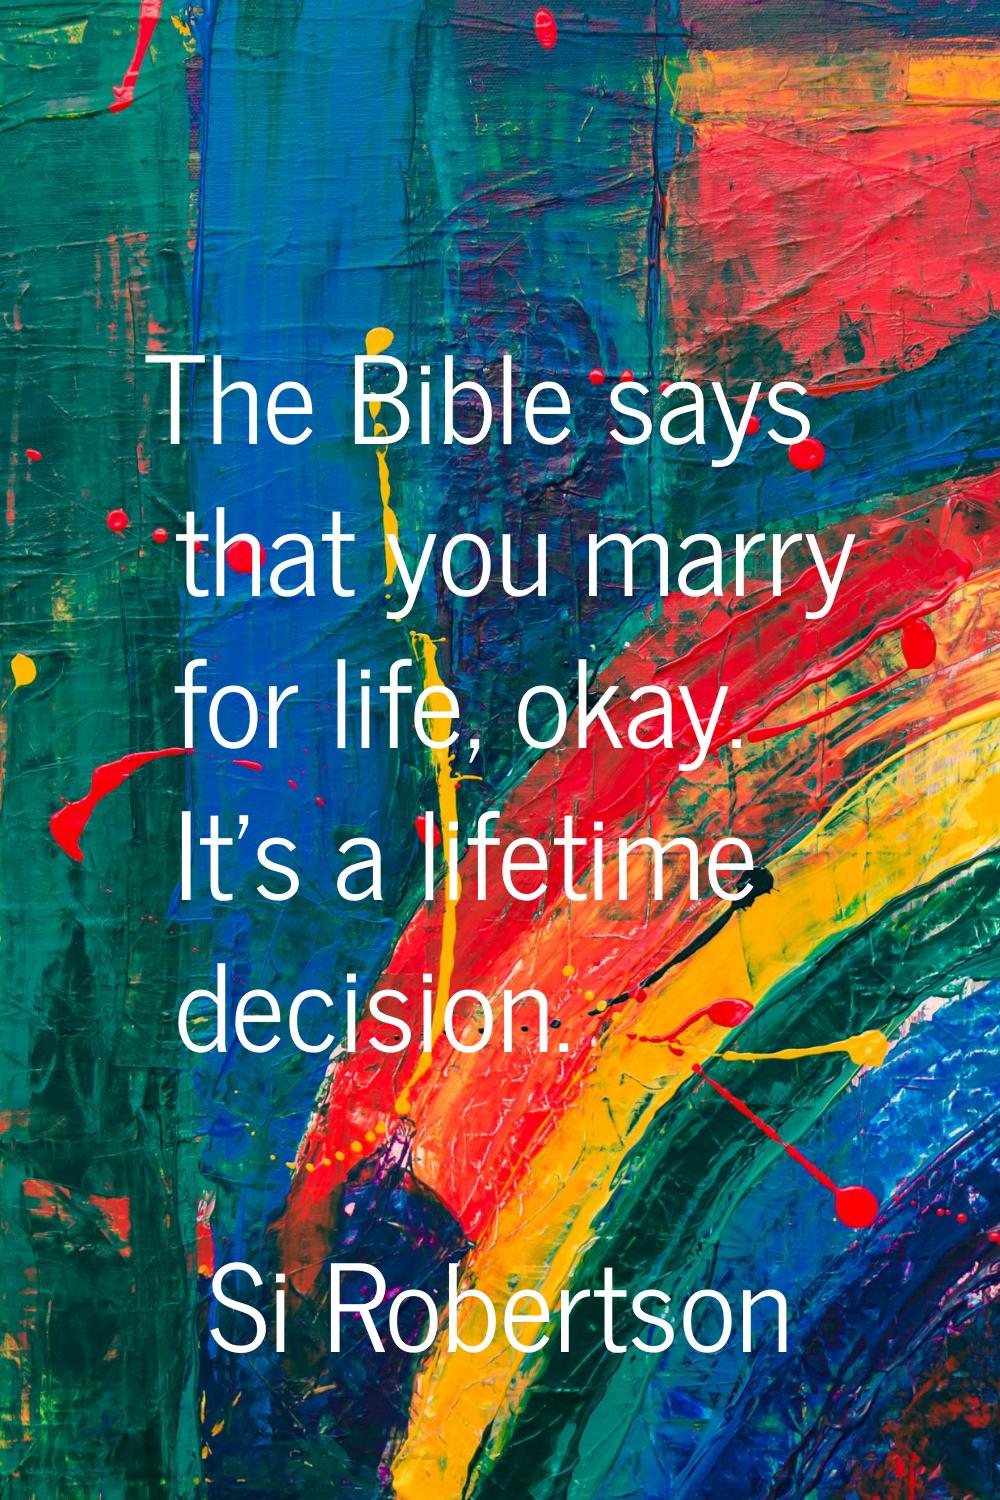 The Bible says that you marry for life, okay. It's a lifetime decision.